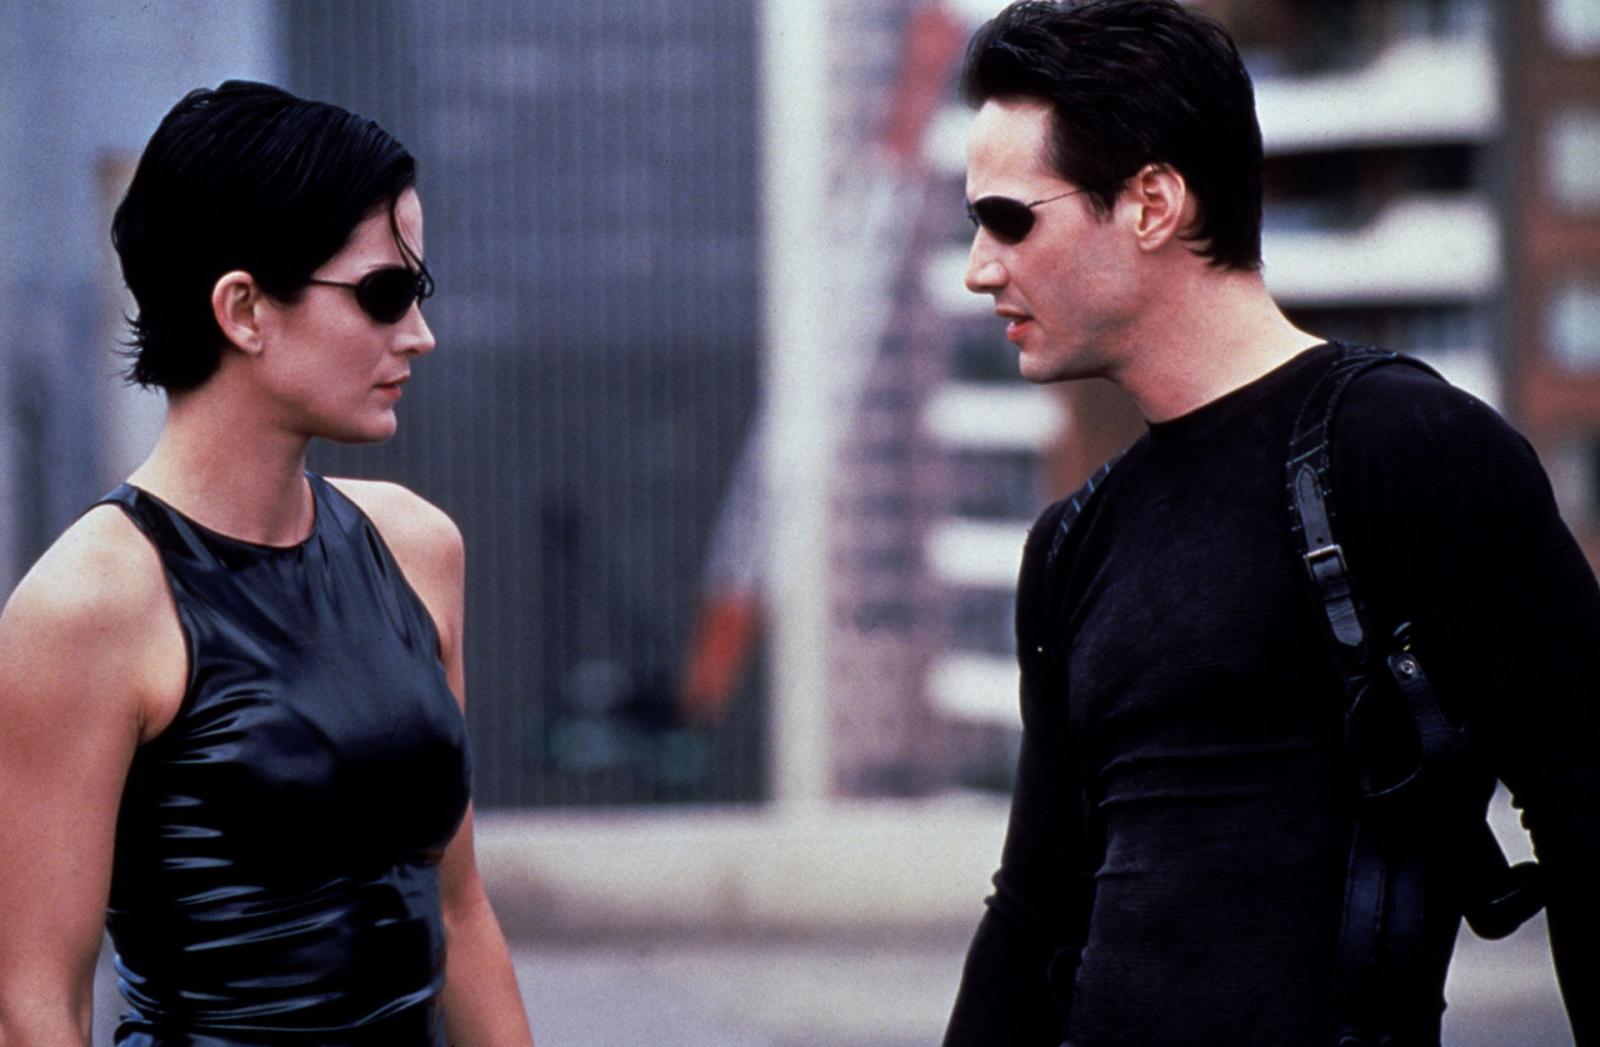 8 Of The Worst Movie Couples With Literally Zero Chemistry on Screen - image 3